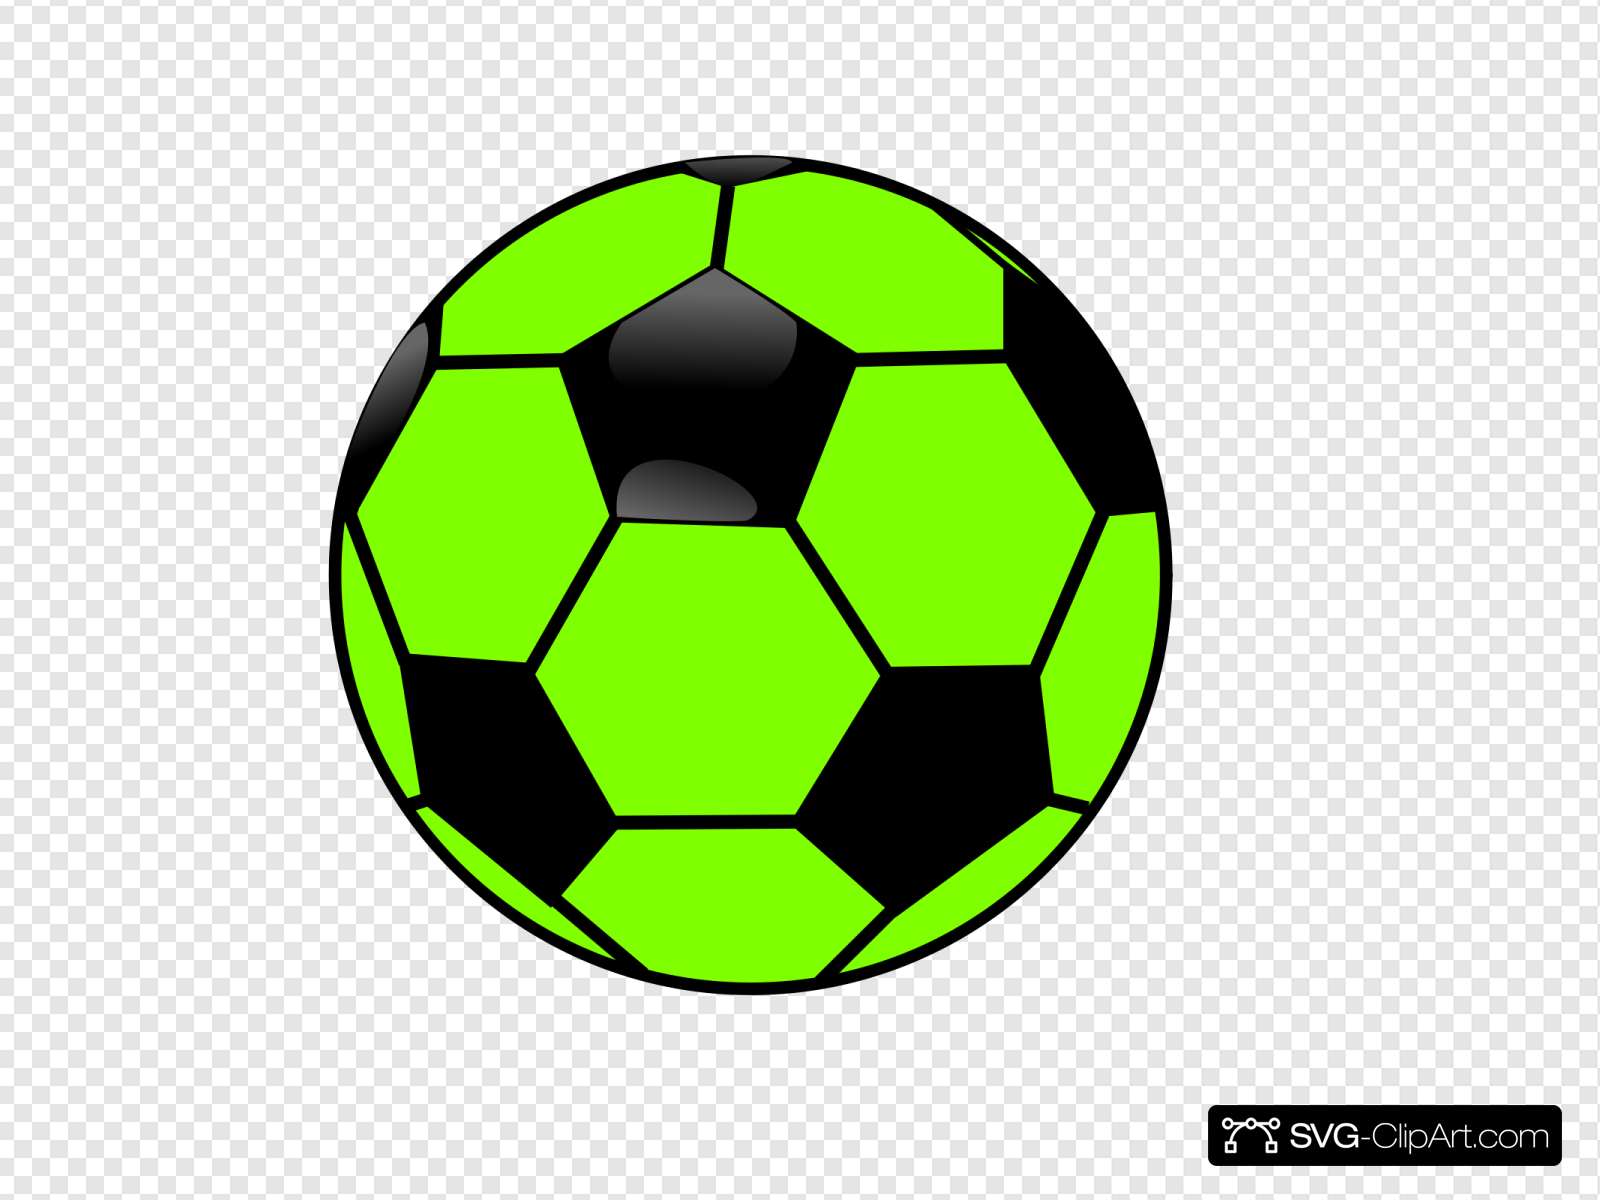 Green And Black Soccer Ball Clip art, Icon and SVG